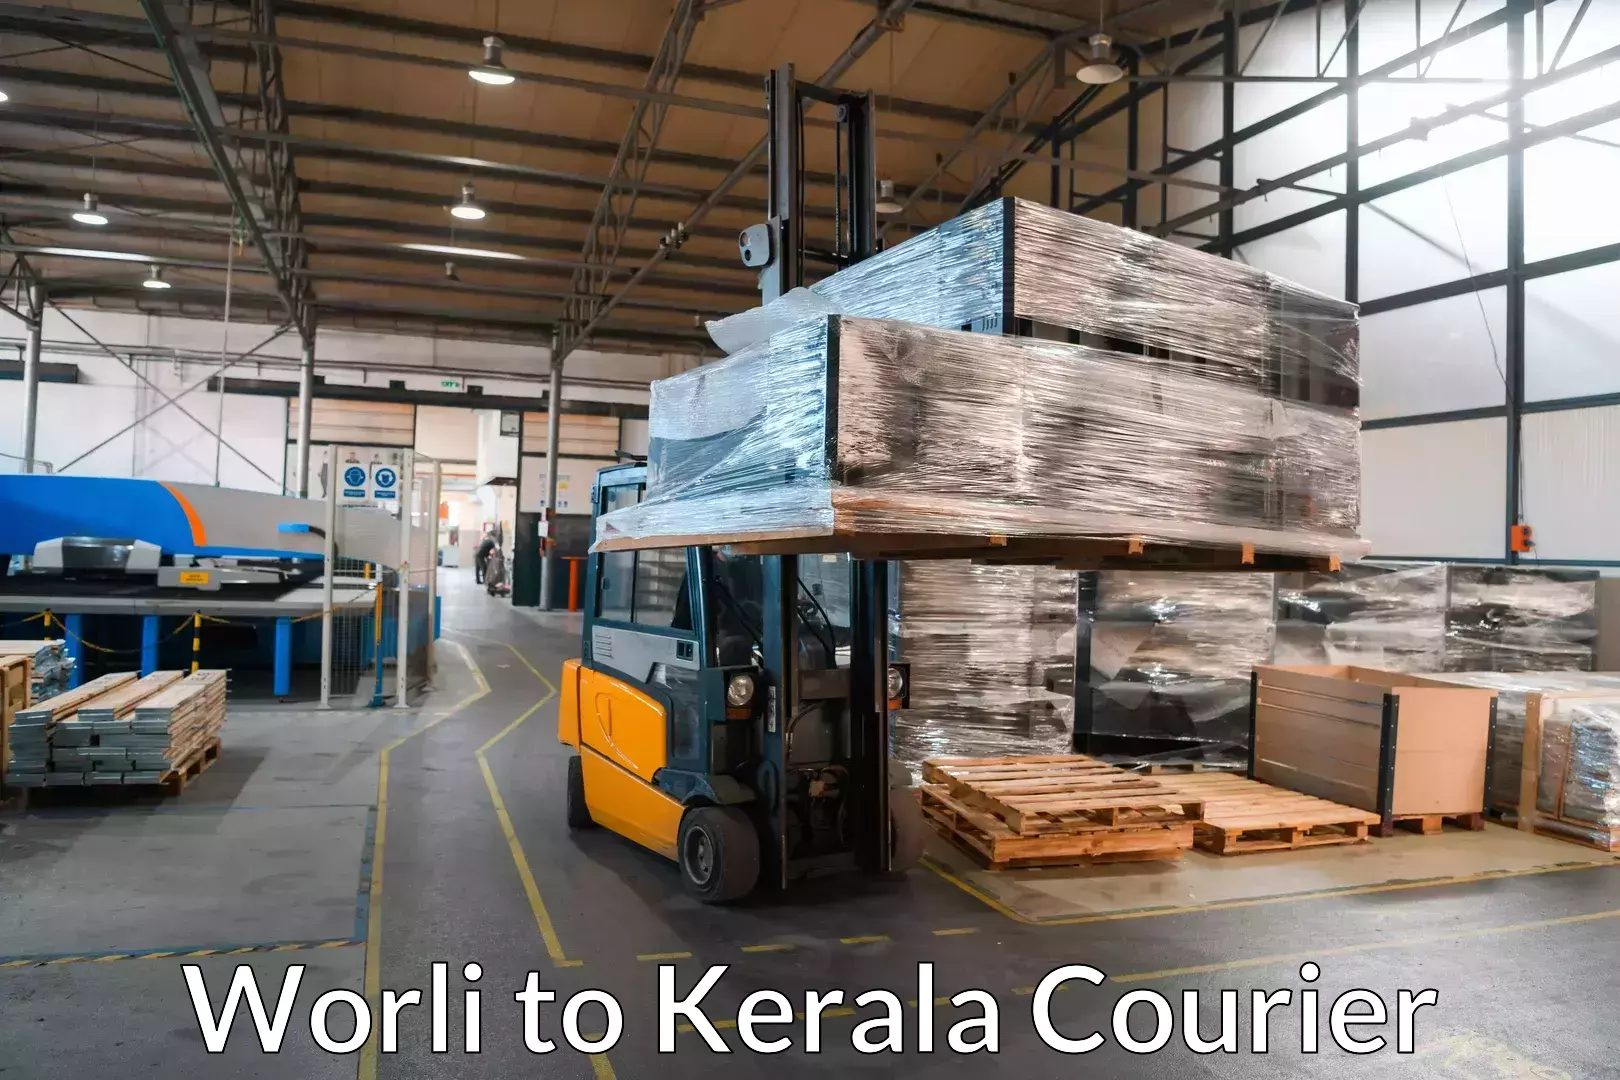 Trusted relocation services Worli to Kerala